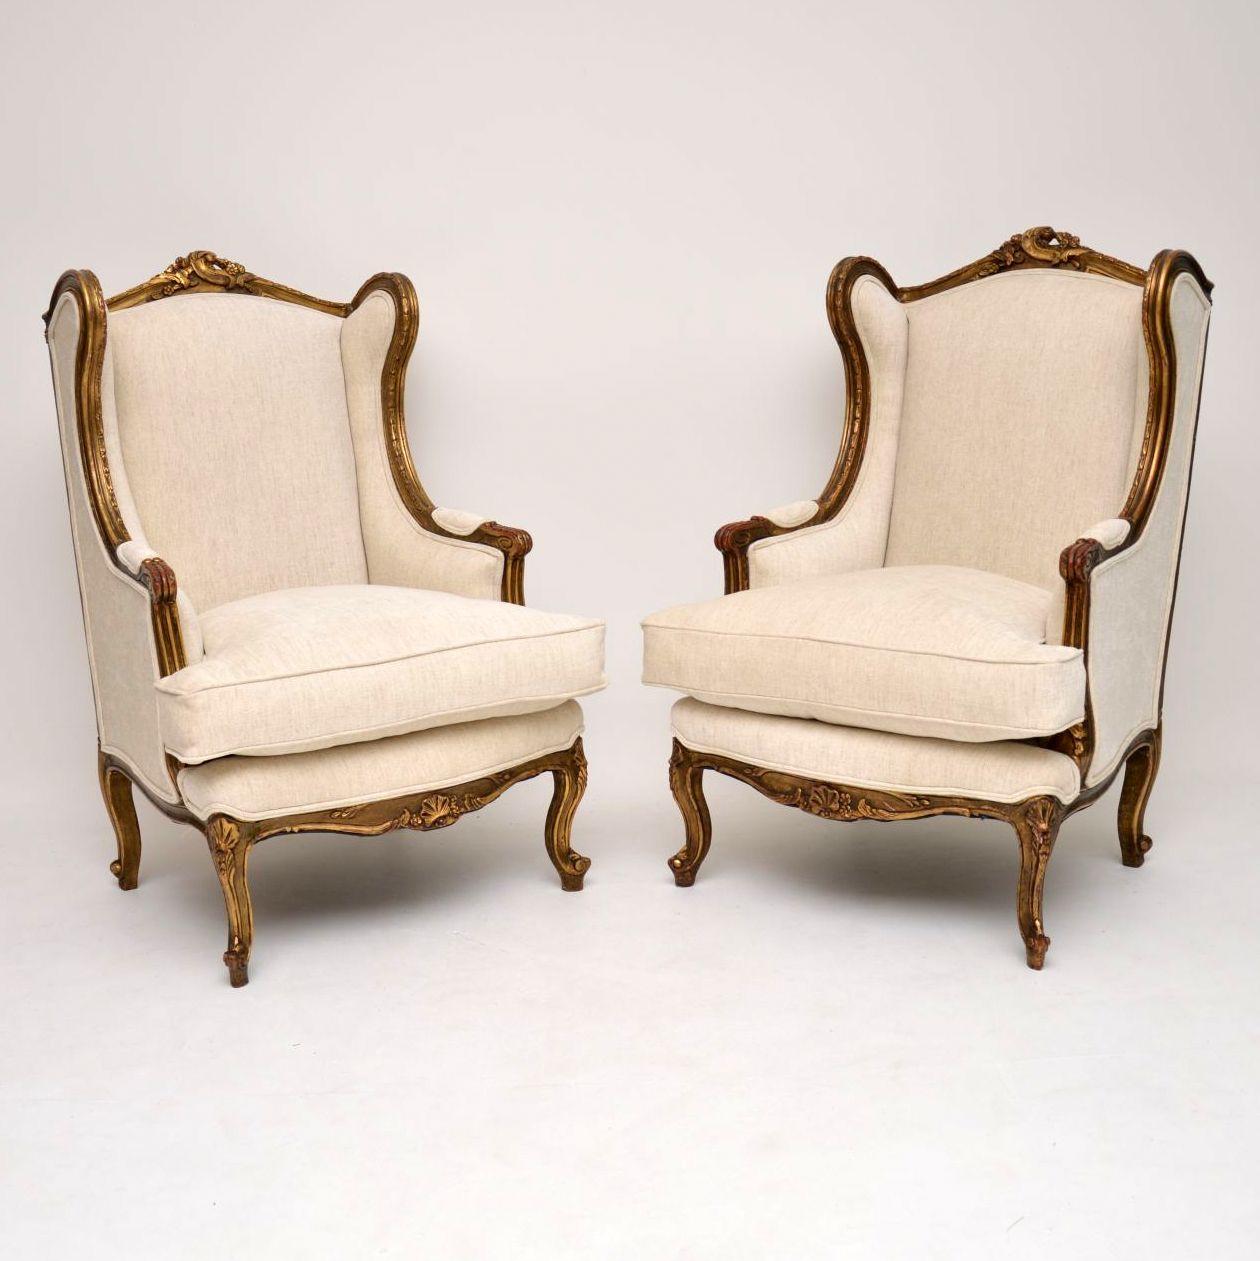 Original pair of antique French giltwood framed wing armchairs in good original condition, which have just been re-upholstered in our very popular cream linen fabric, with double piping. The gilt work finish is naturally aged and you can see the red